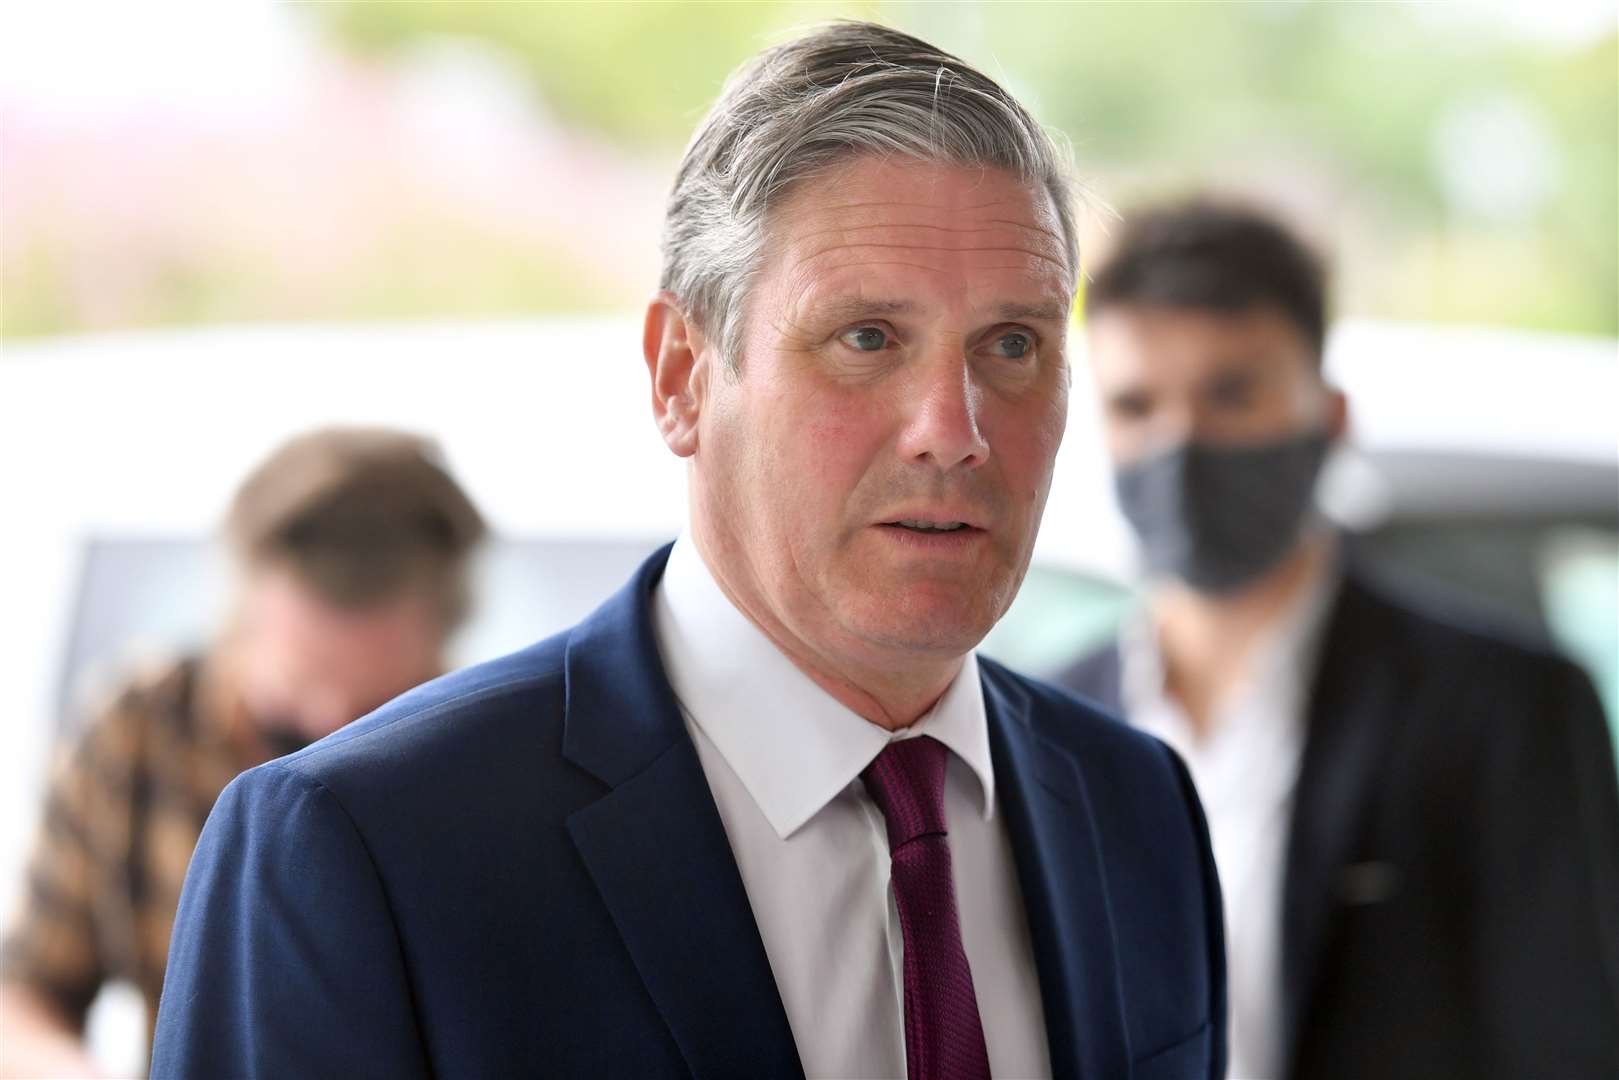 Sir Keir Starmer has questioned whether measures are working (Jacob King/PA)